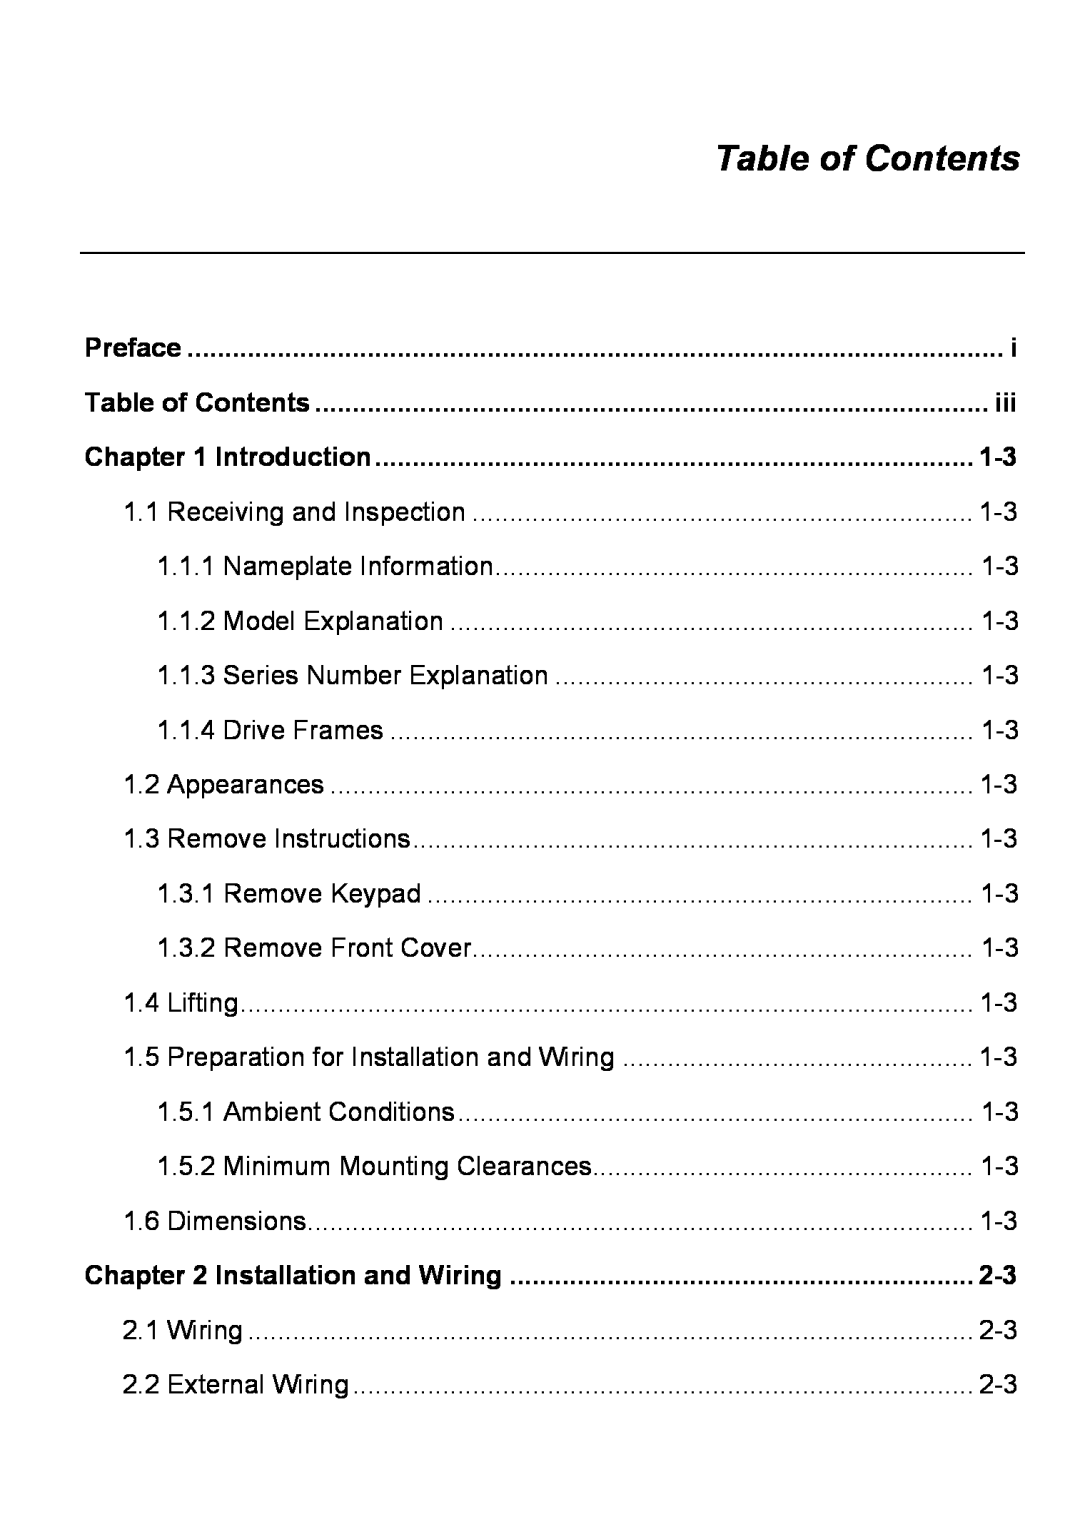 Delta Electronics VFD-G manual Table of Contents, Preface, Introduction, Installation and Wiring 